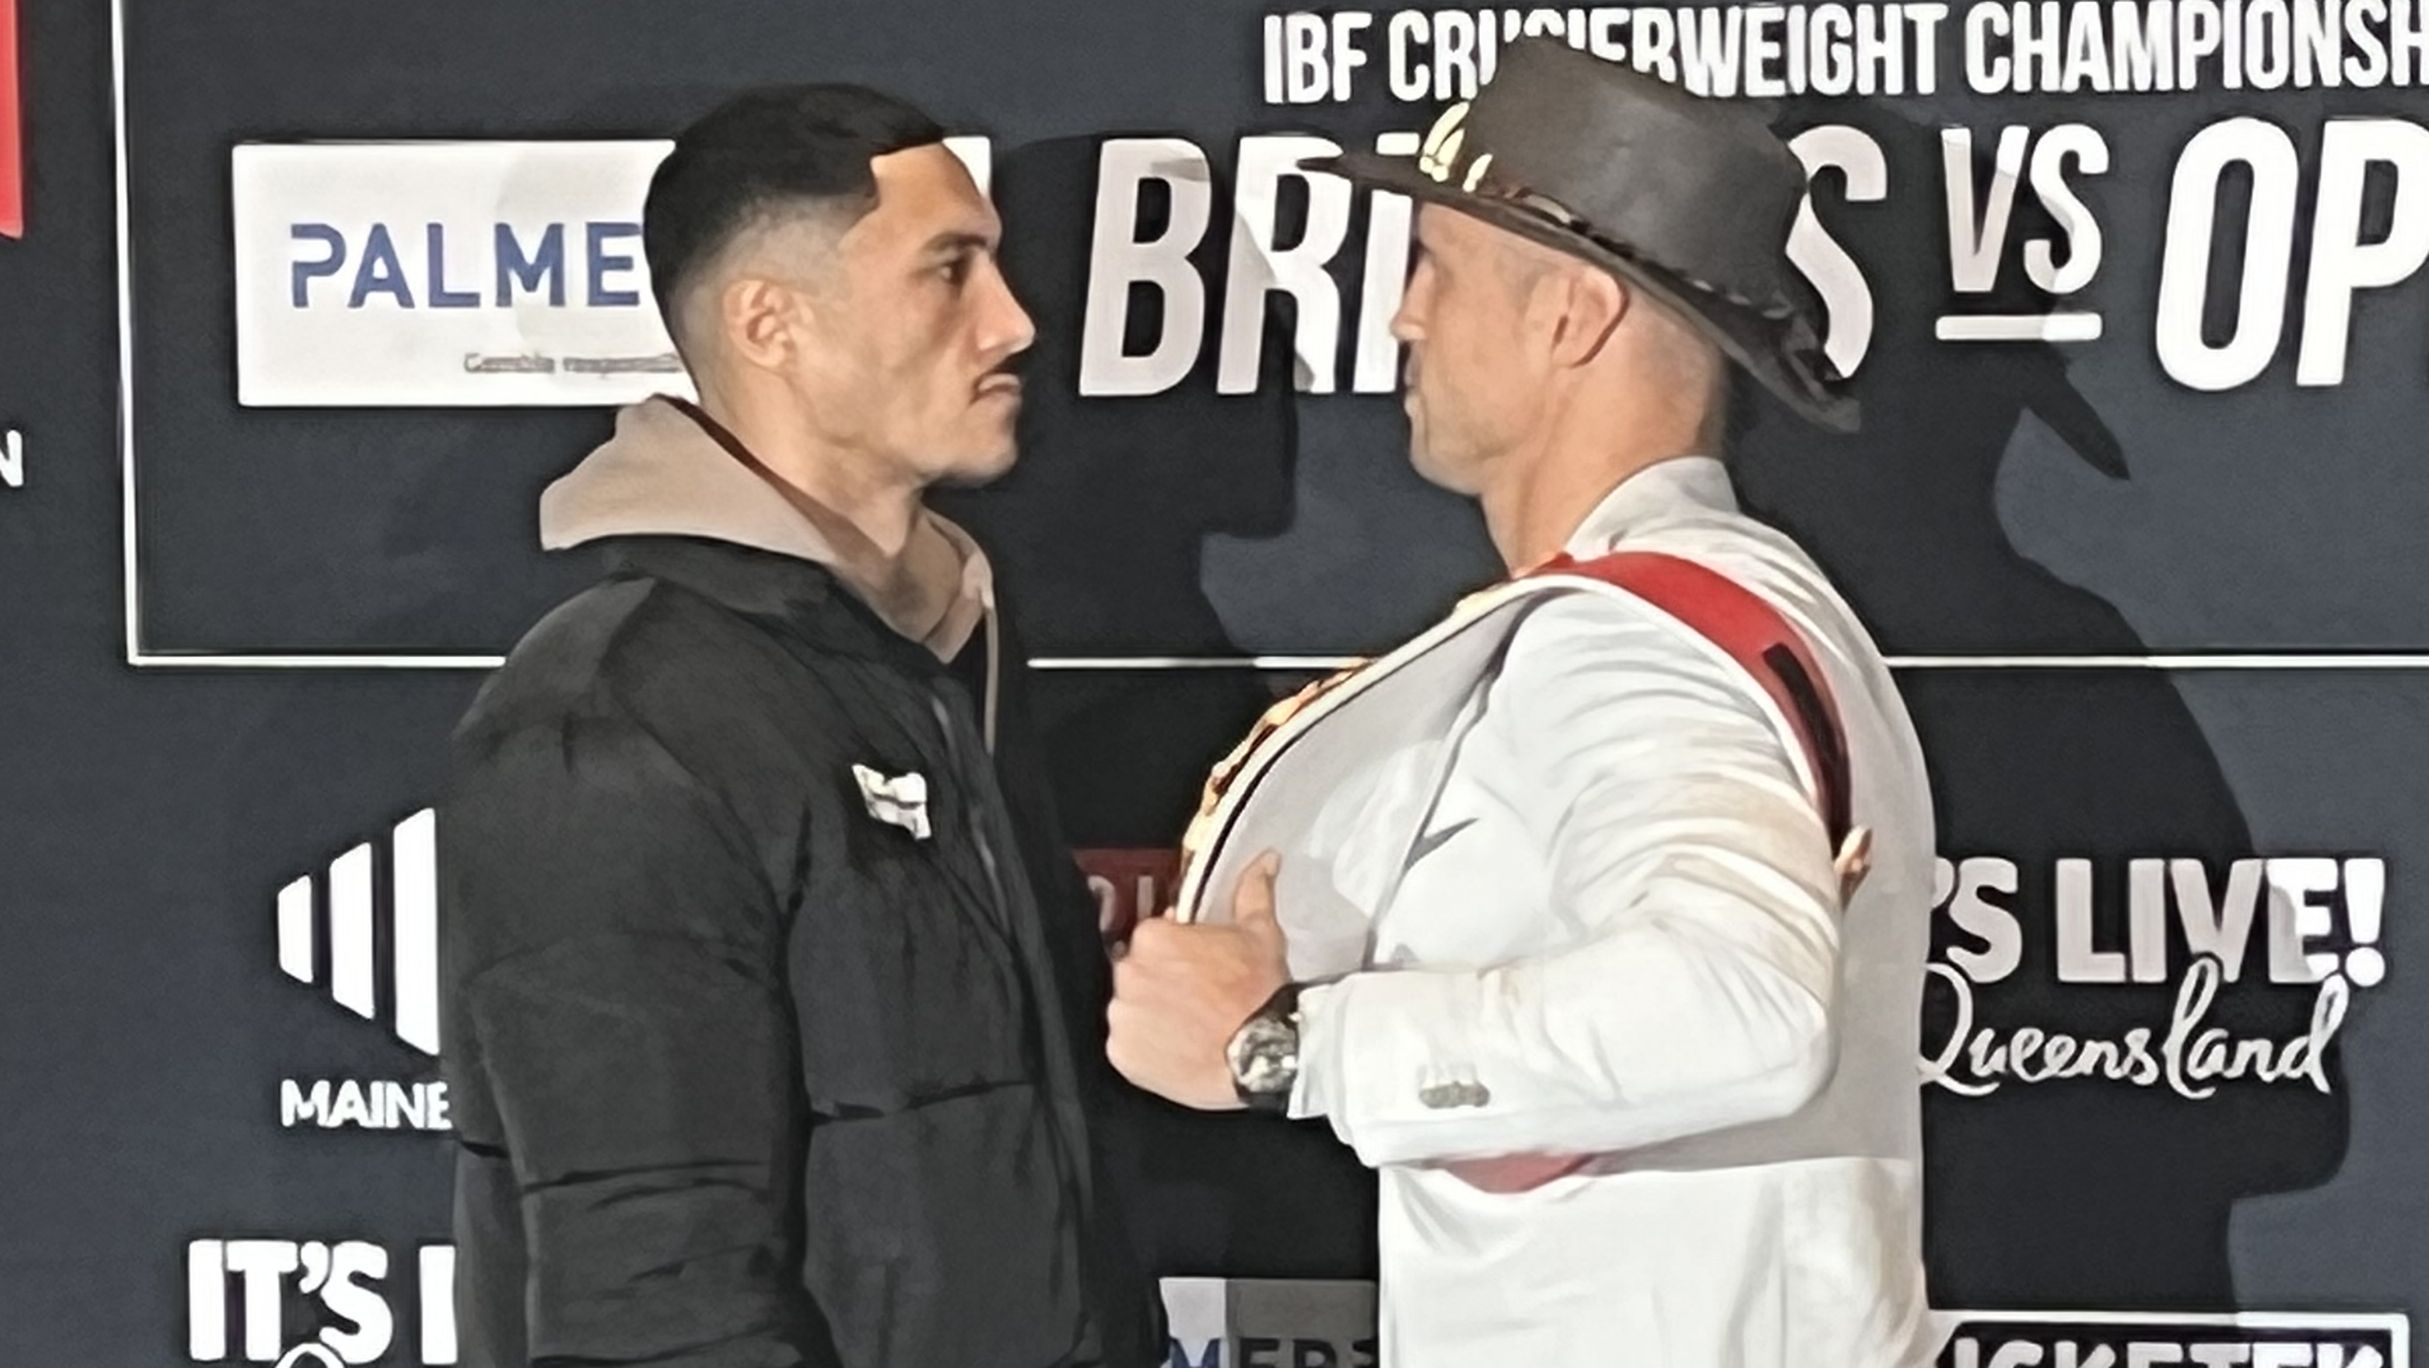 Aussie fighter Jai Opetaia and Latvian cruiserweight champion Mairis Briedis face off ahead of their world title bout on the Gold Coast.